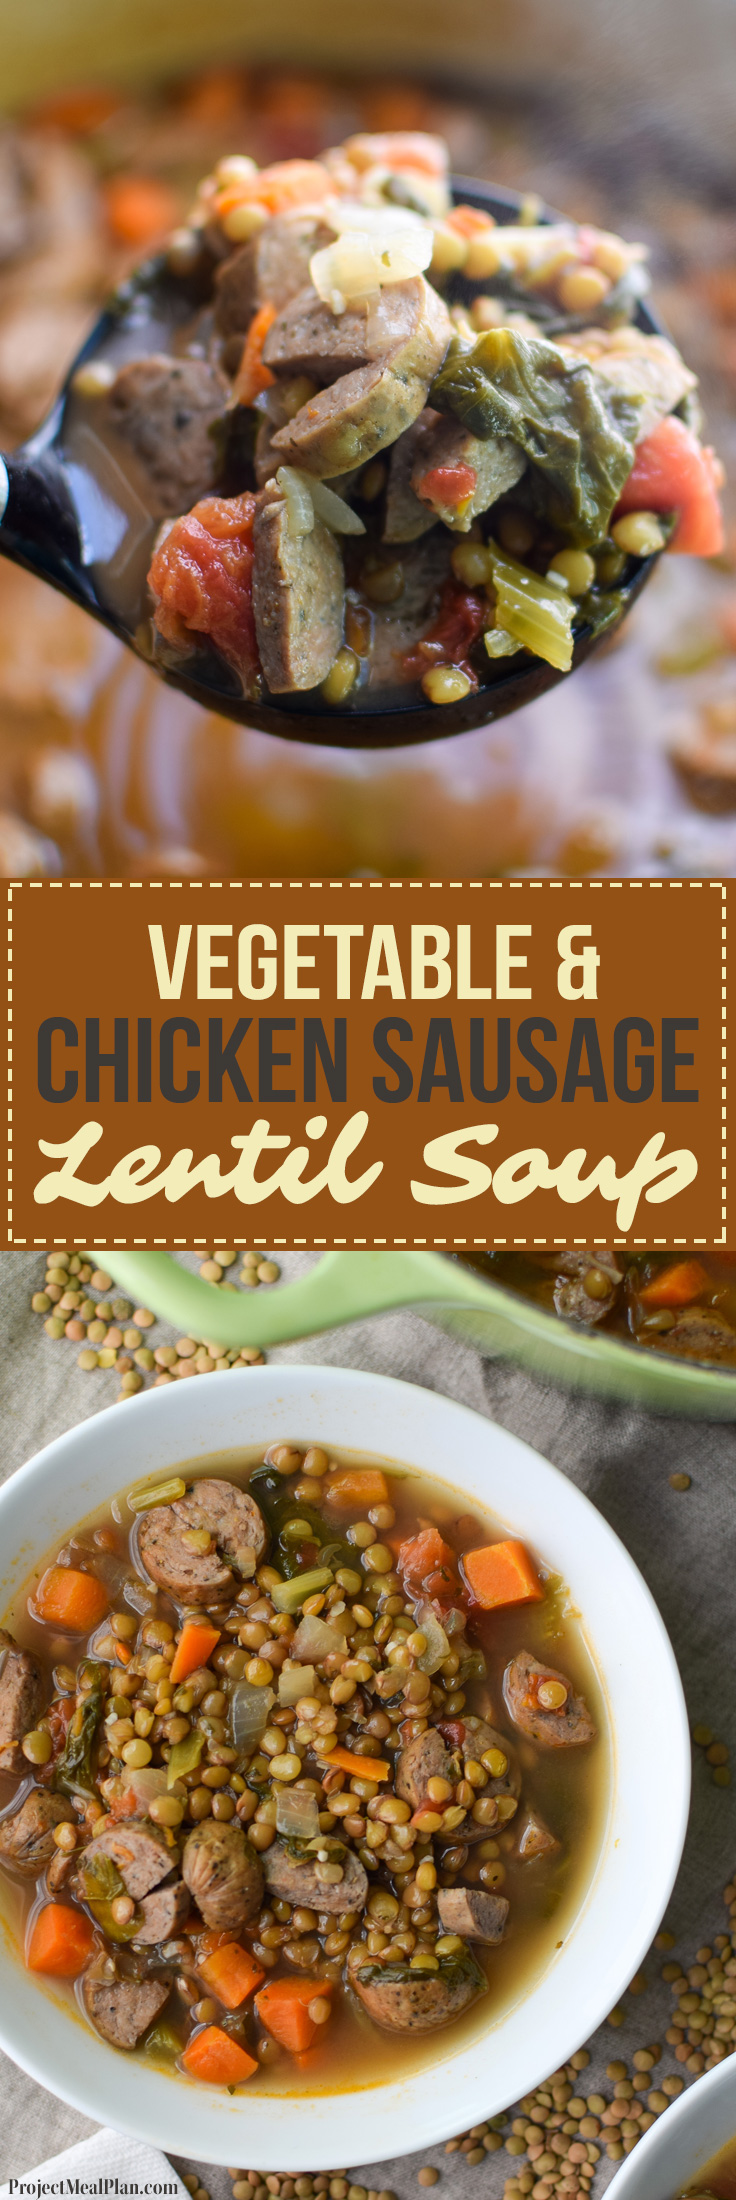 Vegetable & Chicken Sausage Lentil Soup recipe - Simple, hearty and delicious fall soup that will make your home smell amazing on any week night! ProjectMealPlan.com